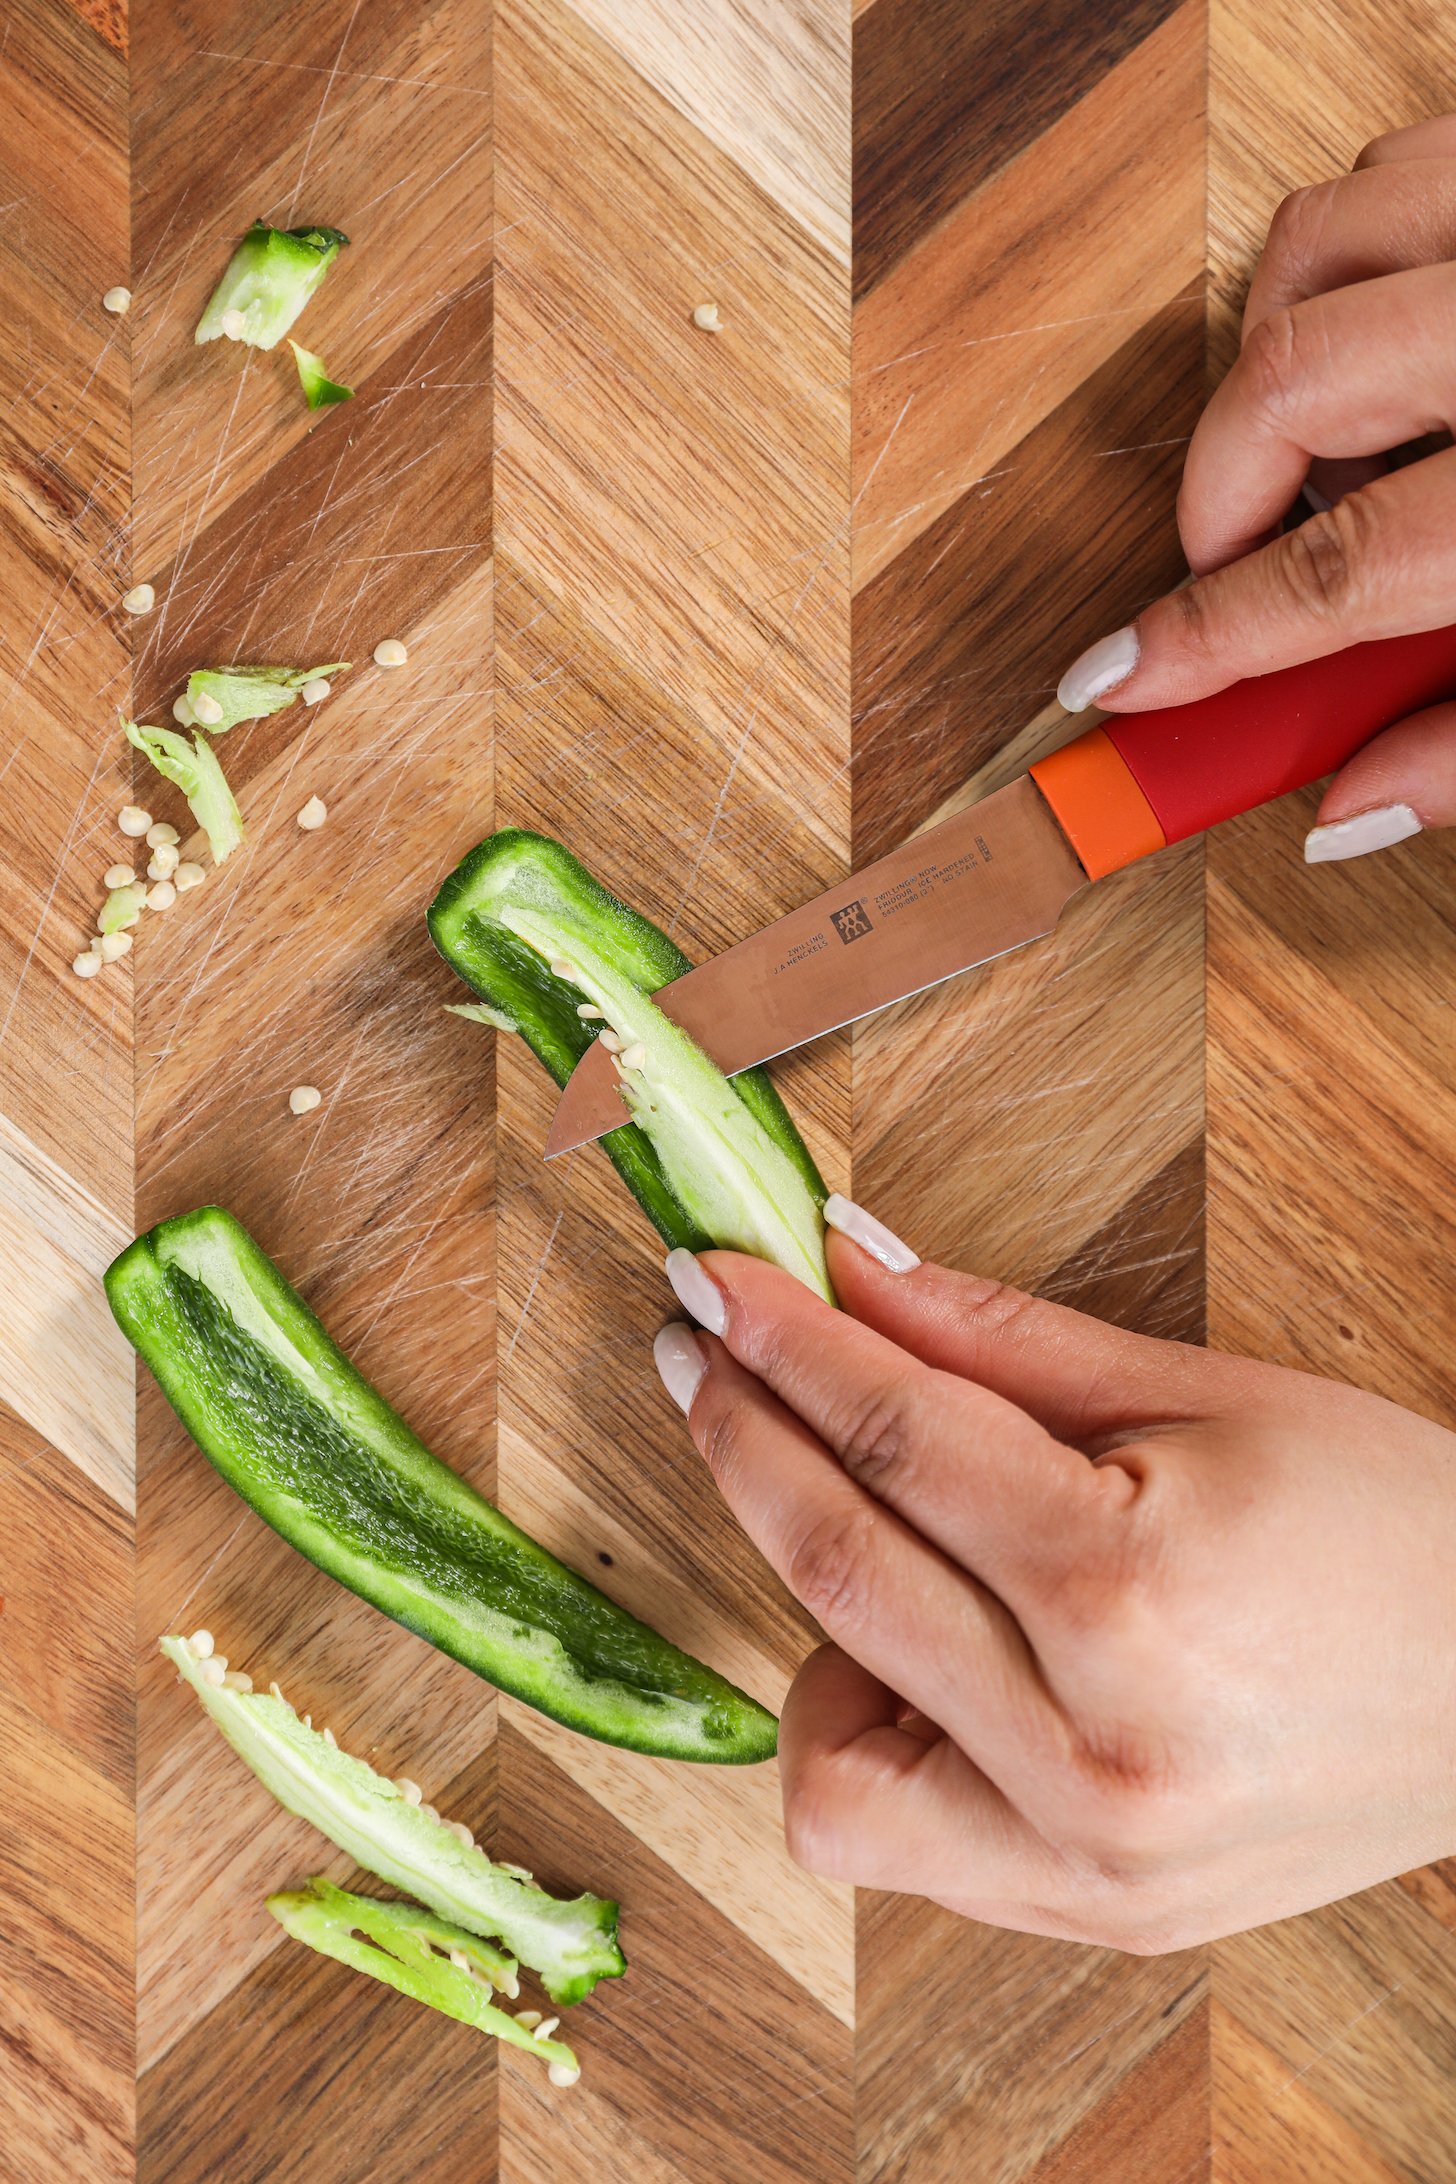 Hands holding a knife and cutting a jalapeno pepper.